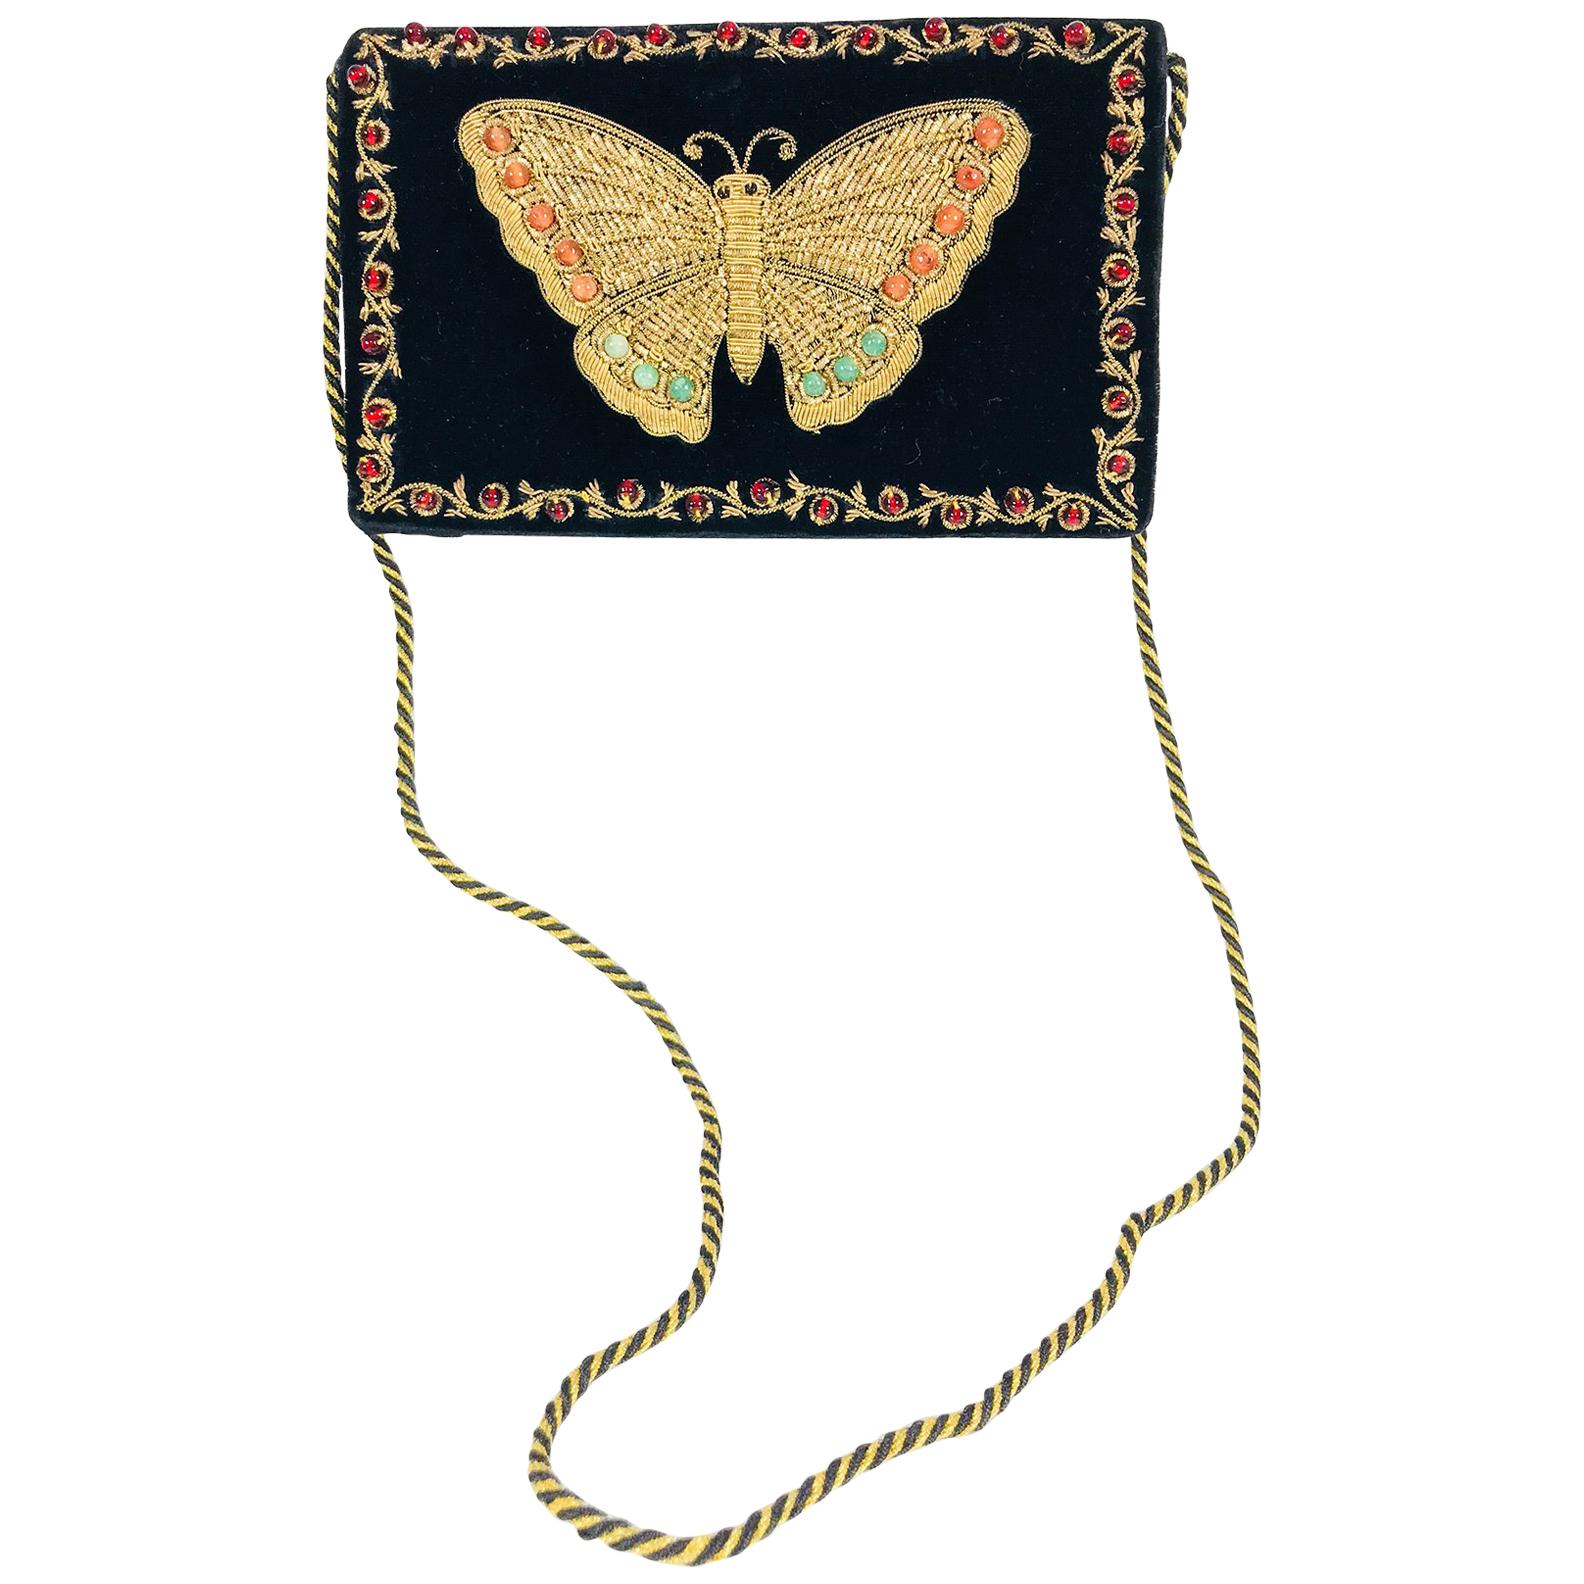 Jewel bead gold bouillon embroidered butterfly evening bag 1970s